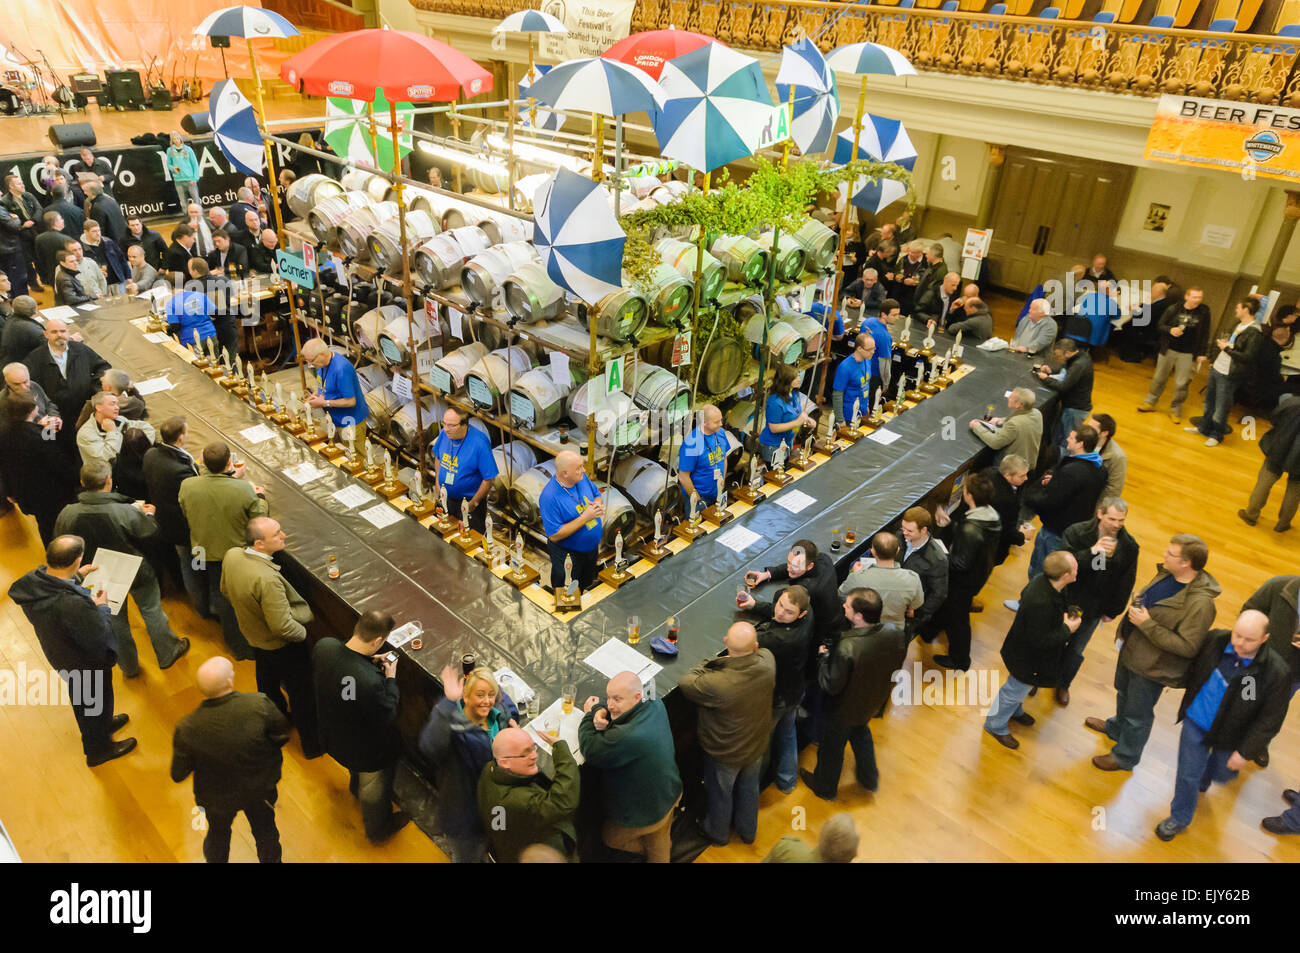 Customers enjoying their pints at a CAMRA real ale festival. Stock Photo